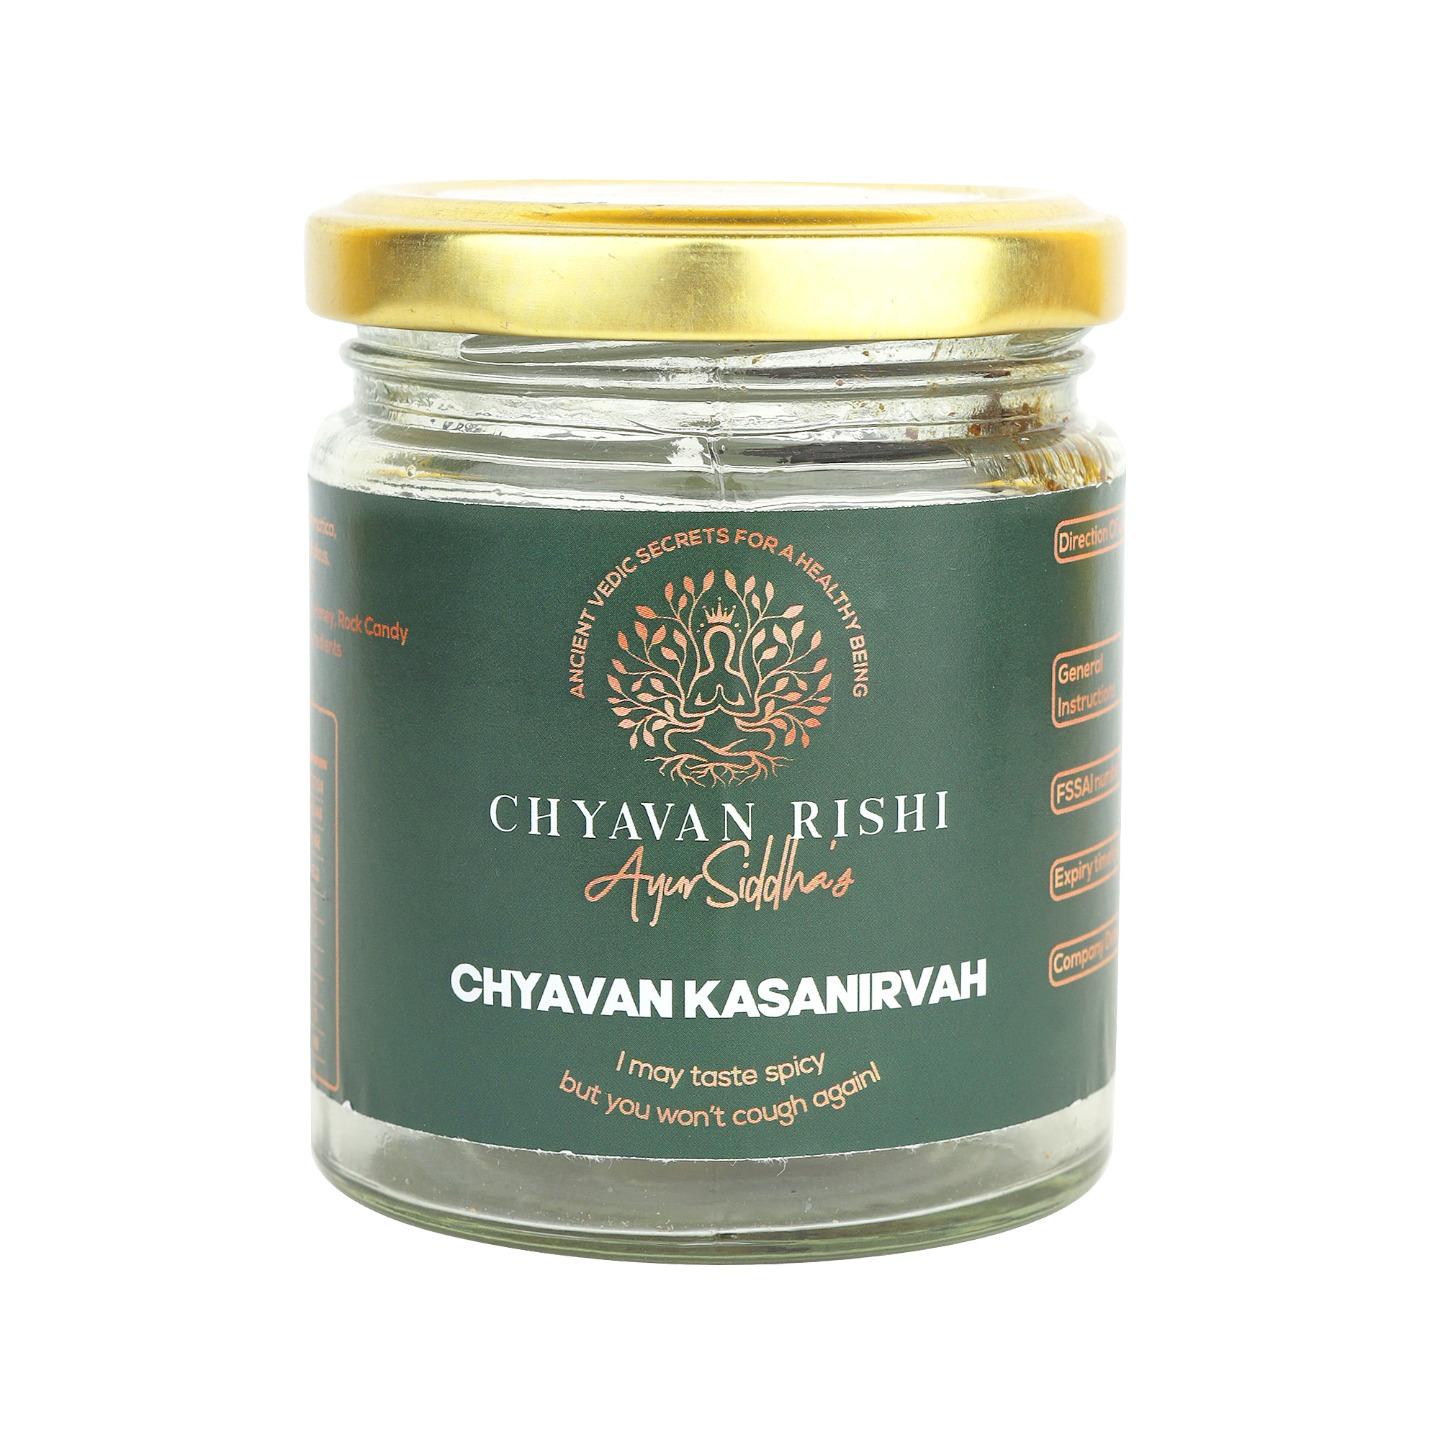 Bottle of 50 grams of Chyavan KasaNirvah, an ayurvedic medicine for cough and tuberculosis Edit alt text